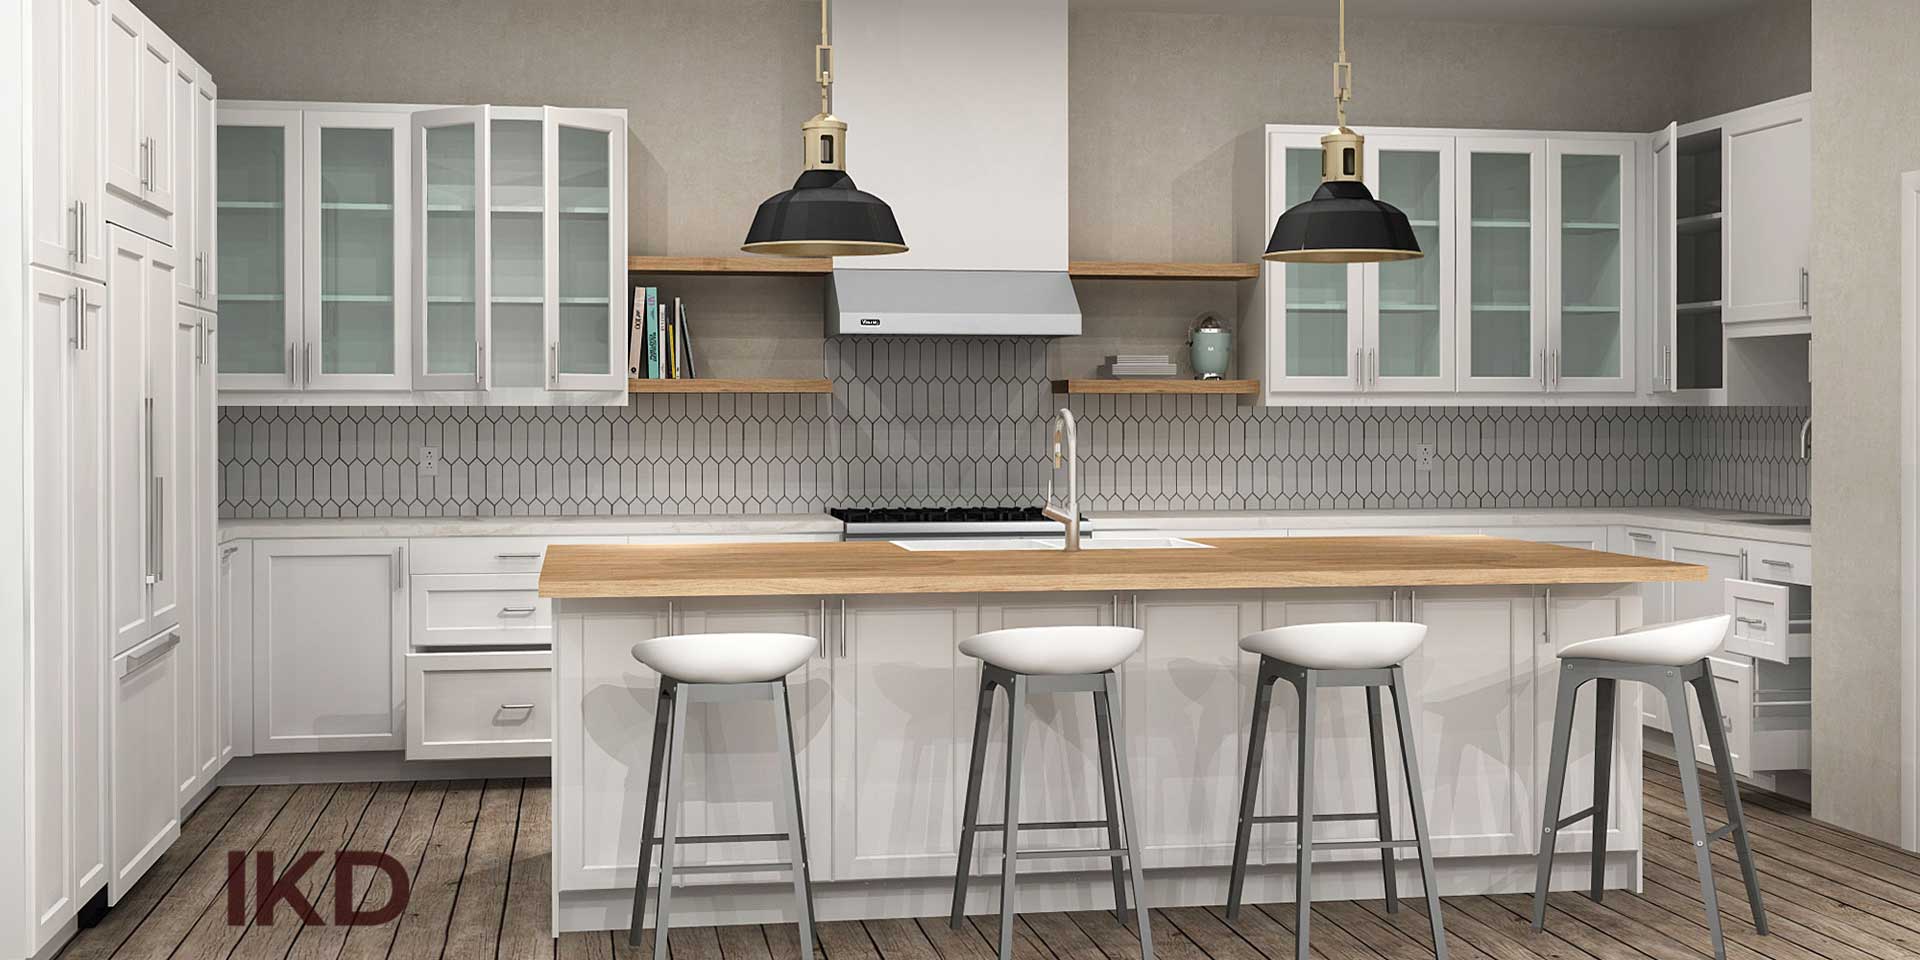 IKEA Kitchen design with upscale elements